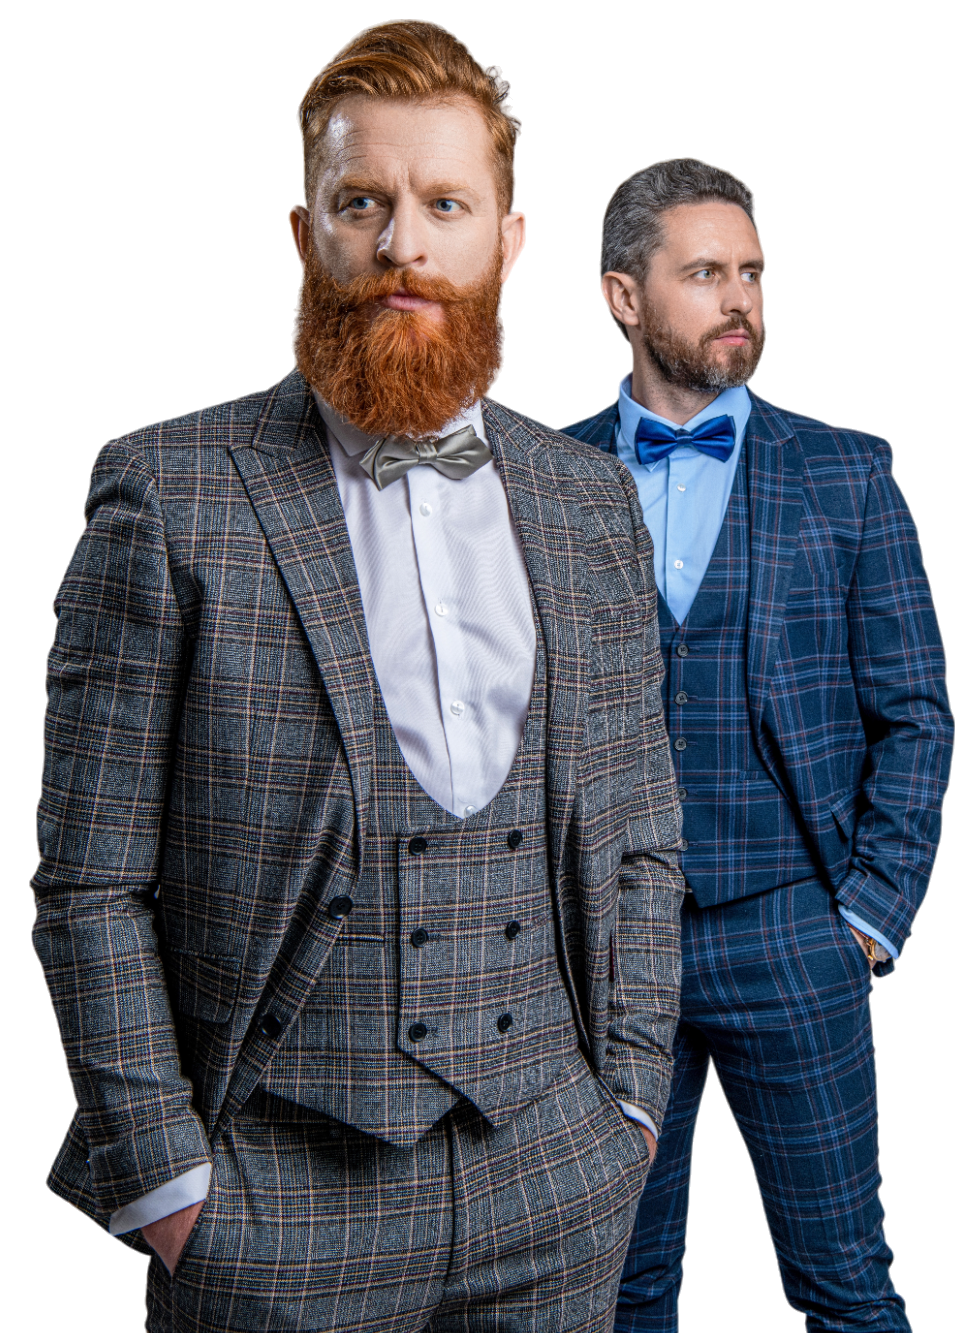 Two Men Wearing Checkered Suits